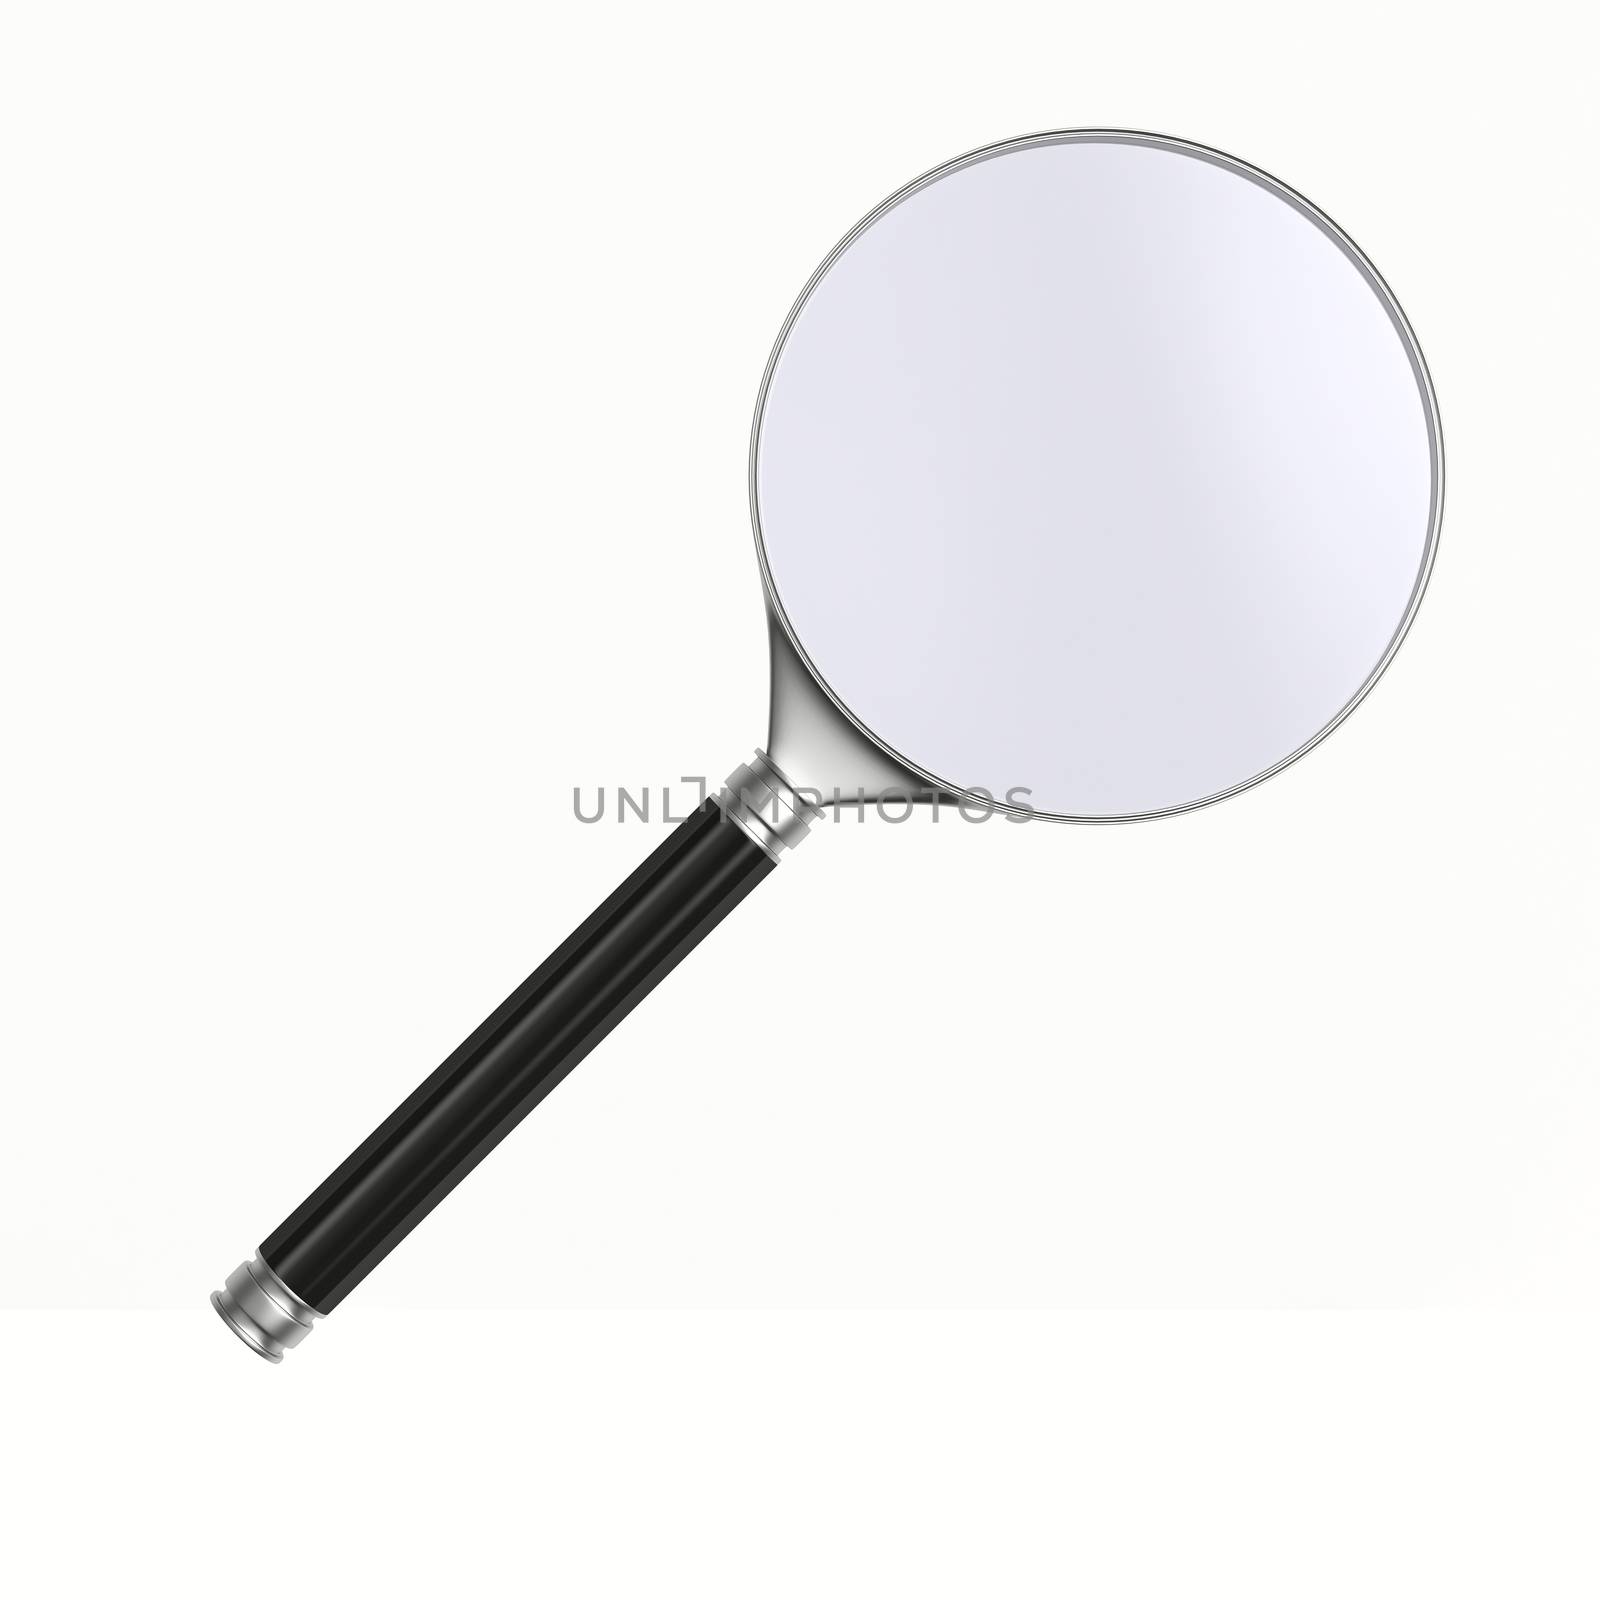 Magnifier on white background. Isolated 3D image